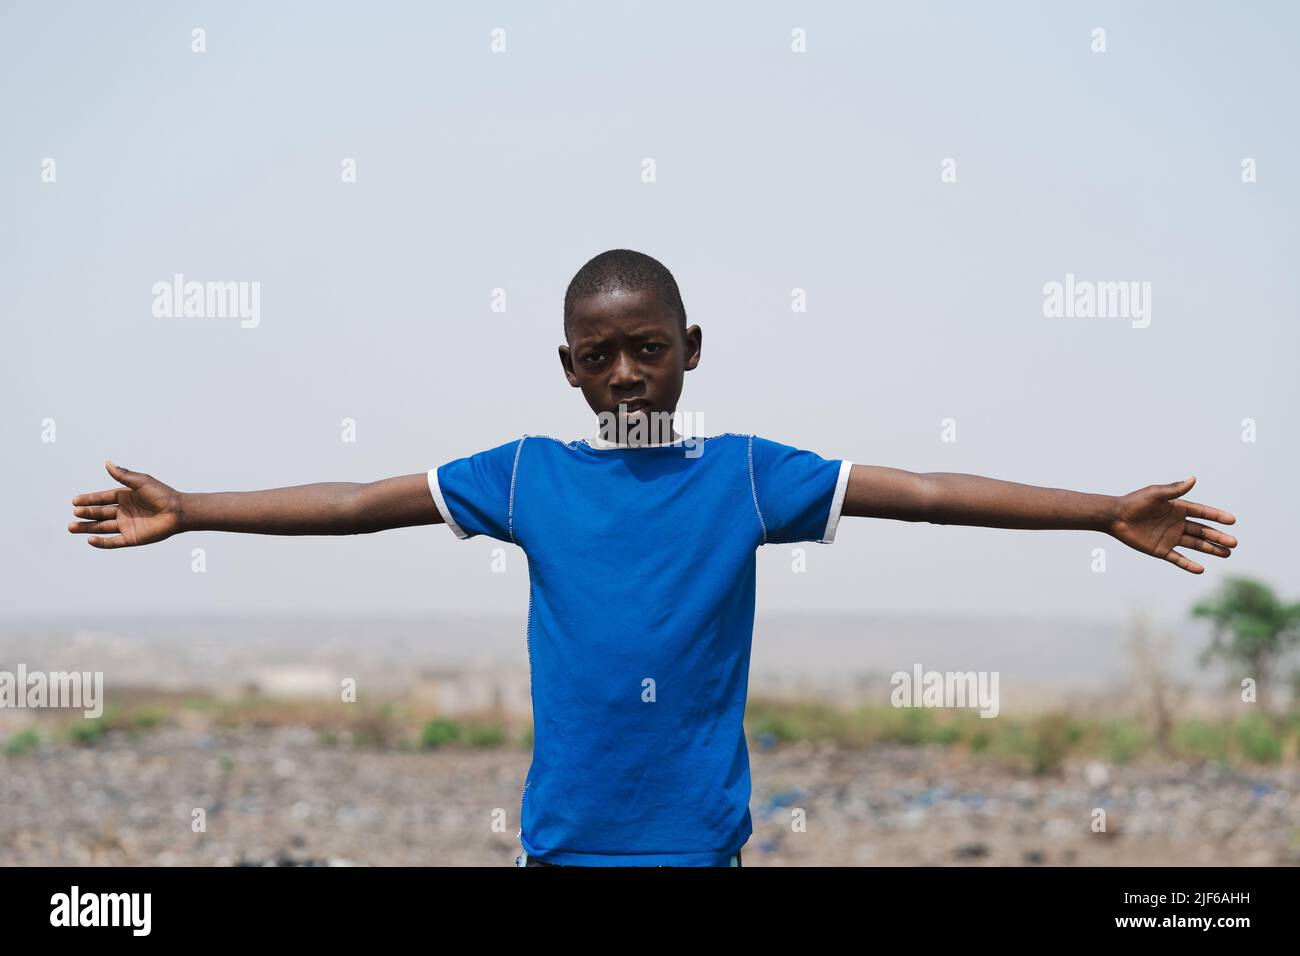 Worried African boy with outstretched arms standing in an arid field with a provocative frown on his face; global warming, climate change and deforest Stock Photo